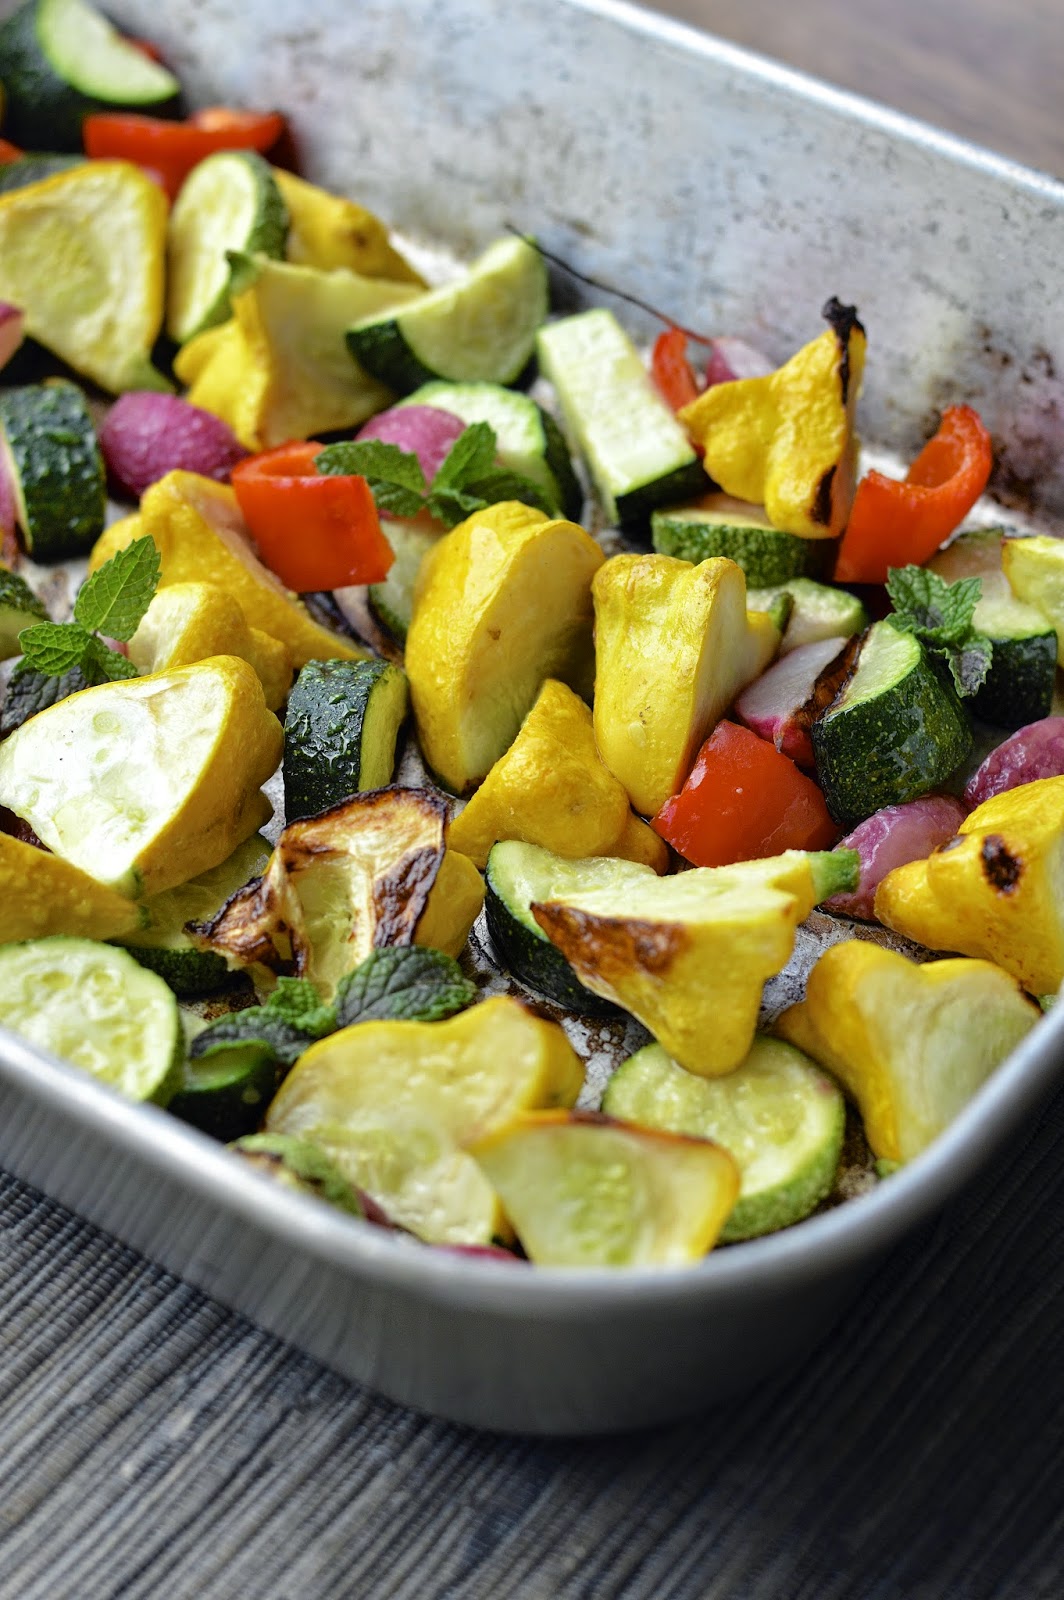 Summer veggies roasted on the grill and drizzled with a smokey lemon tahini dressing